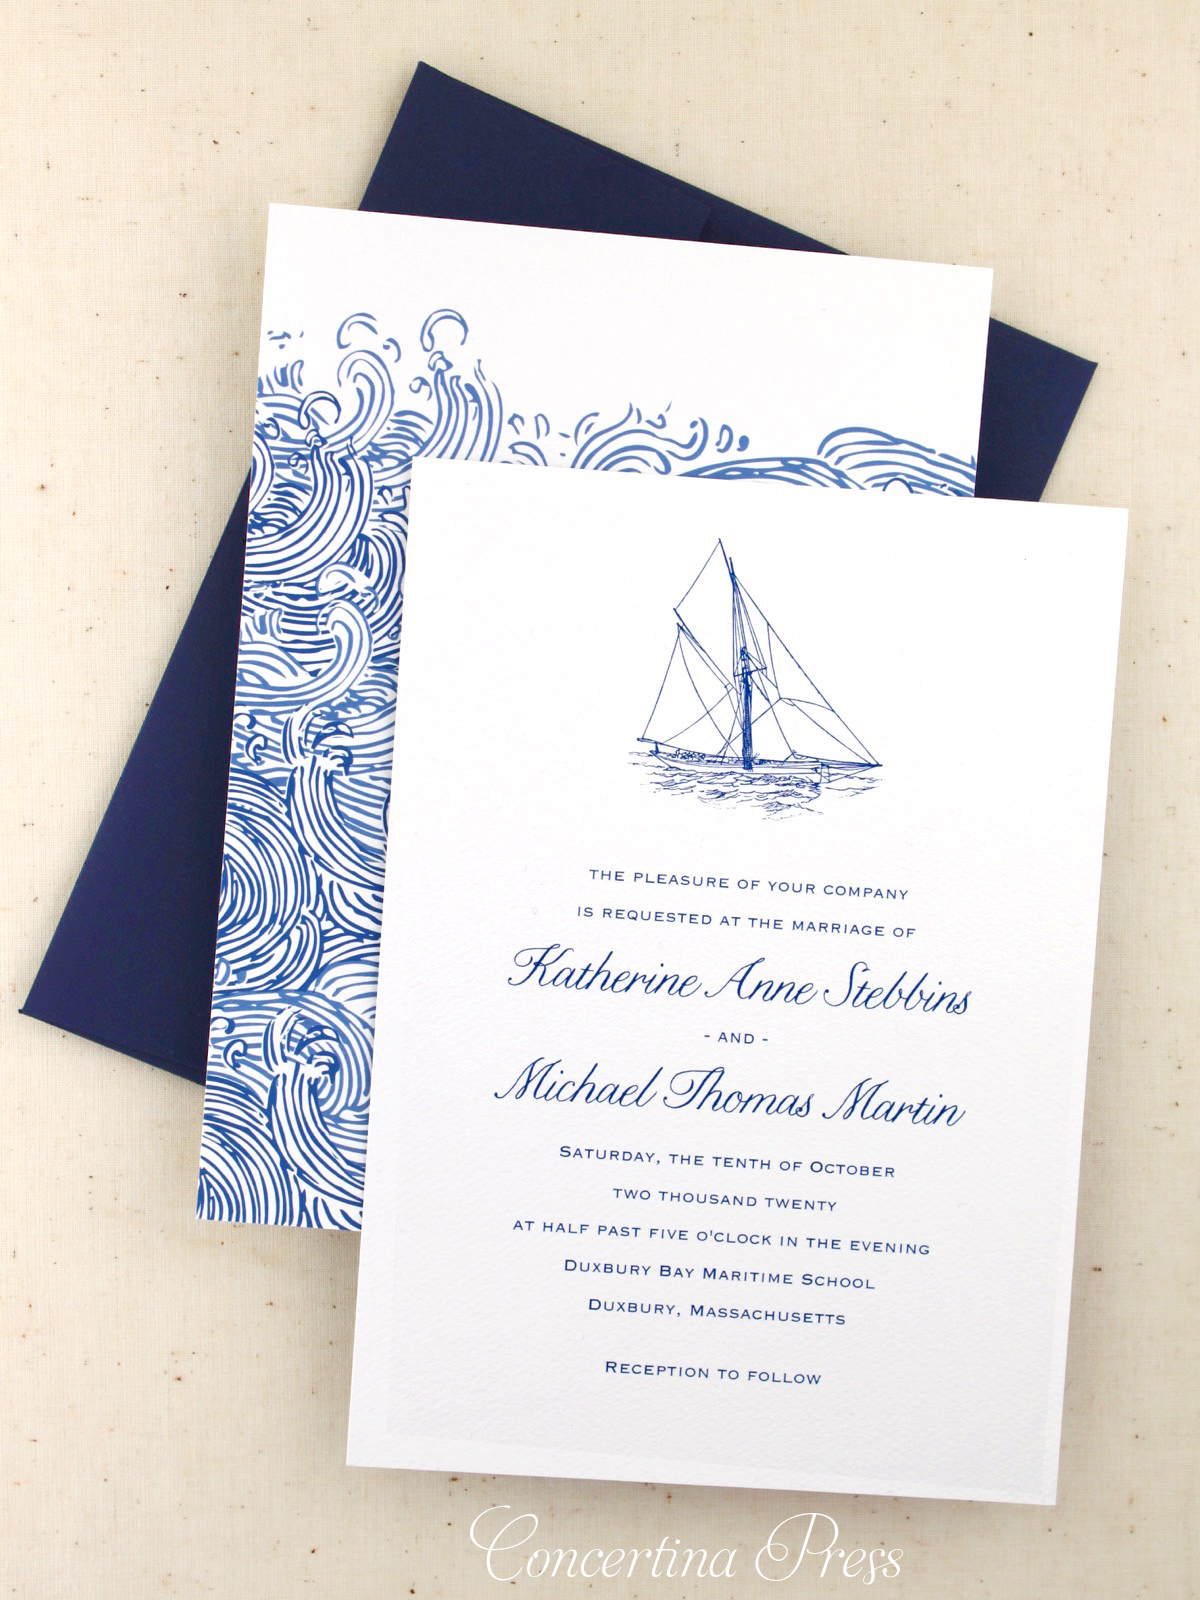 Yacht Club Wedding Invitations for a Nautical Ceremony by Concertina Press